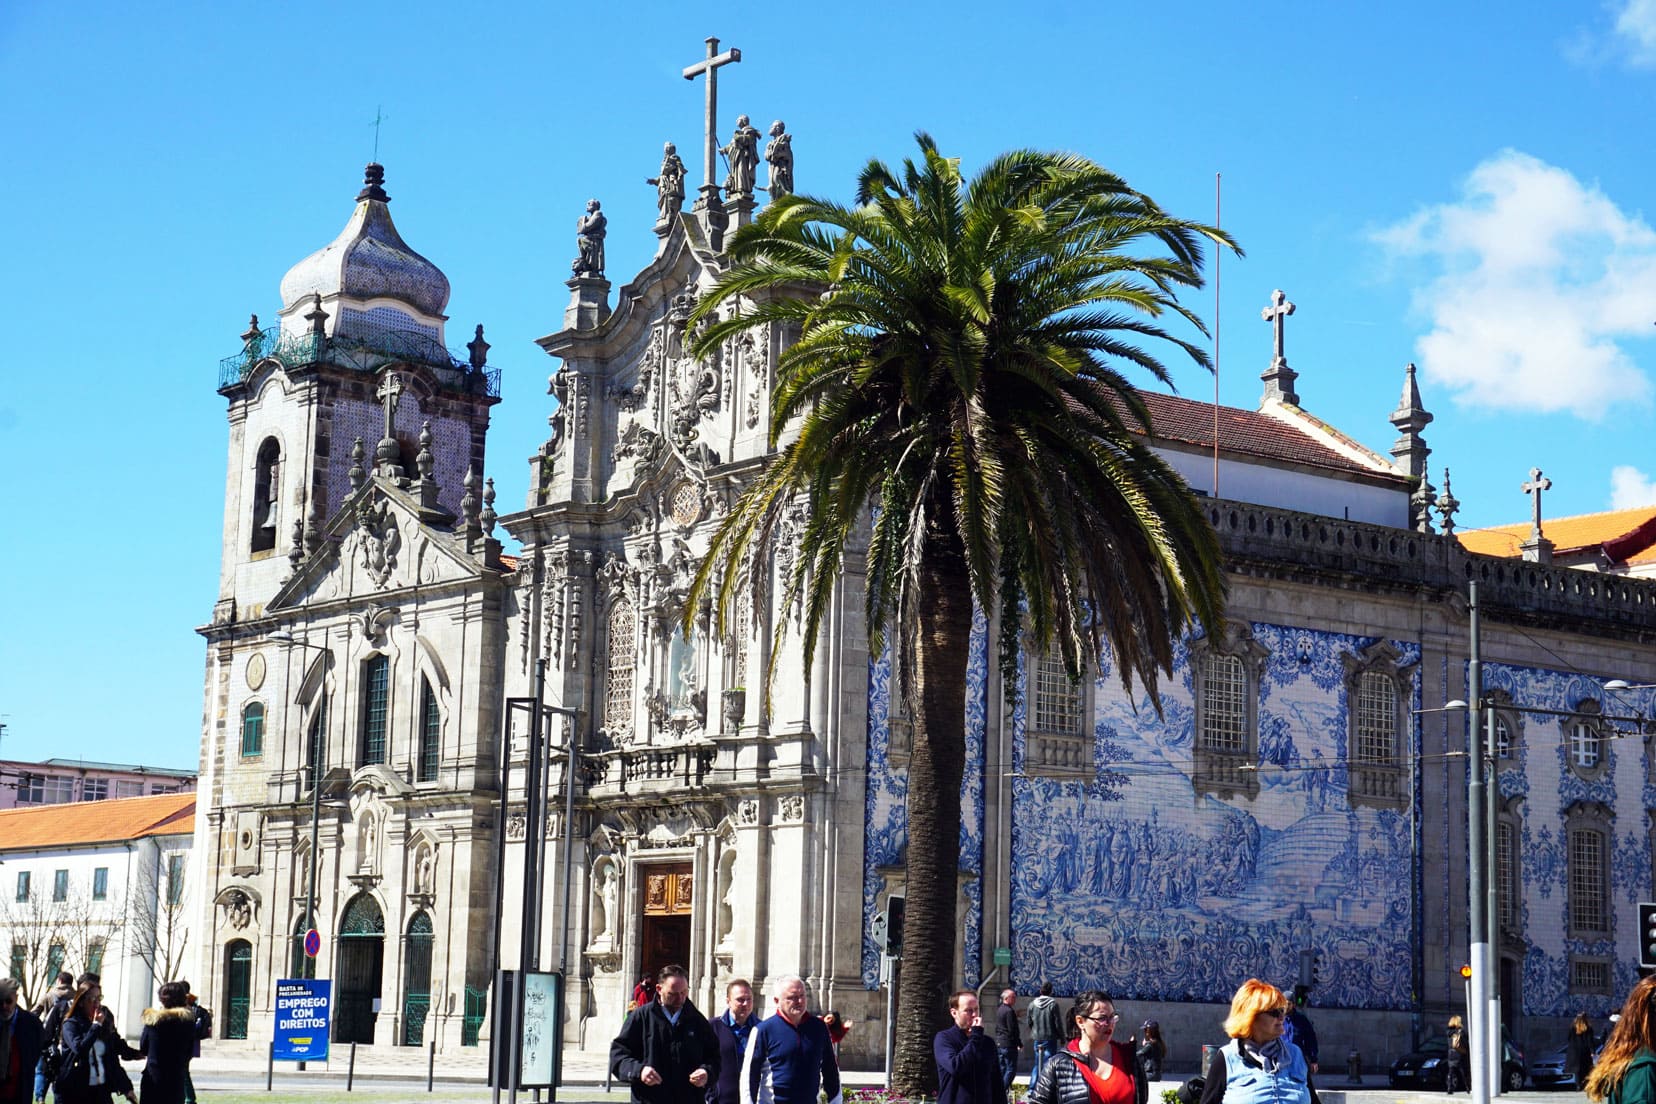 Church with azulejo blue and white tiles on the facade with a palm tree beside it and people milling by 